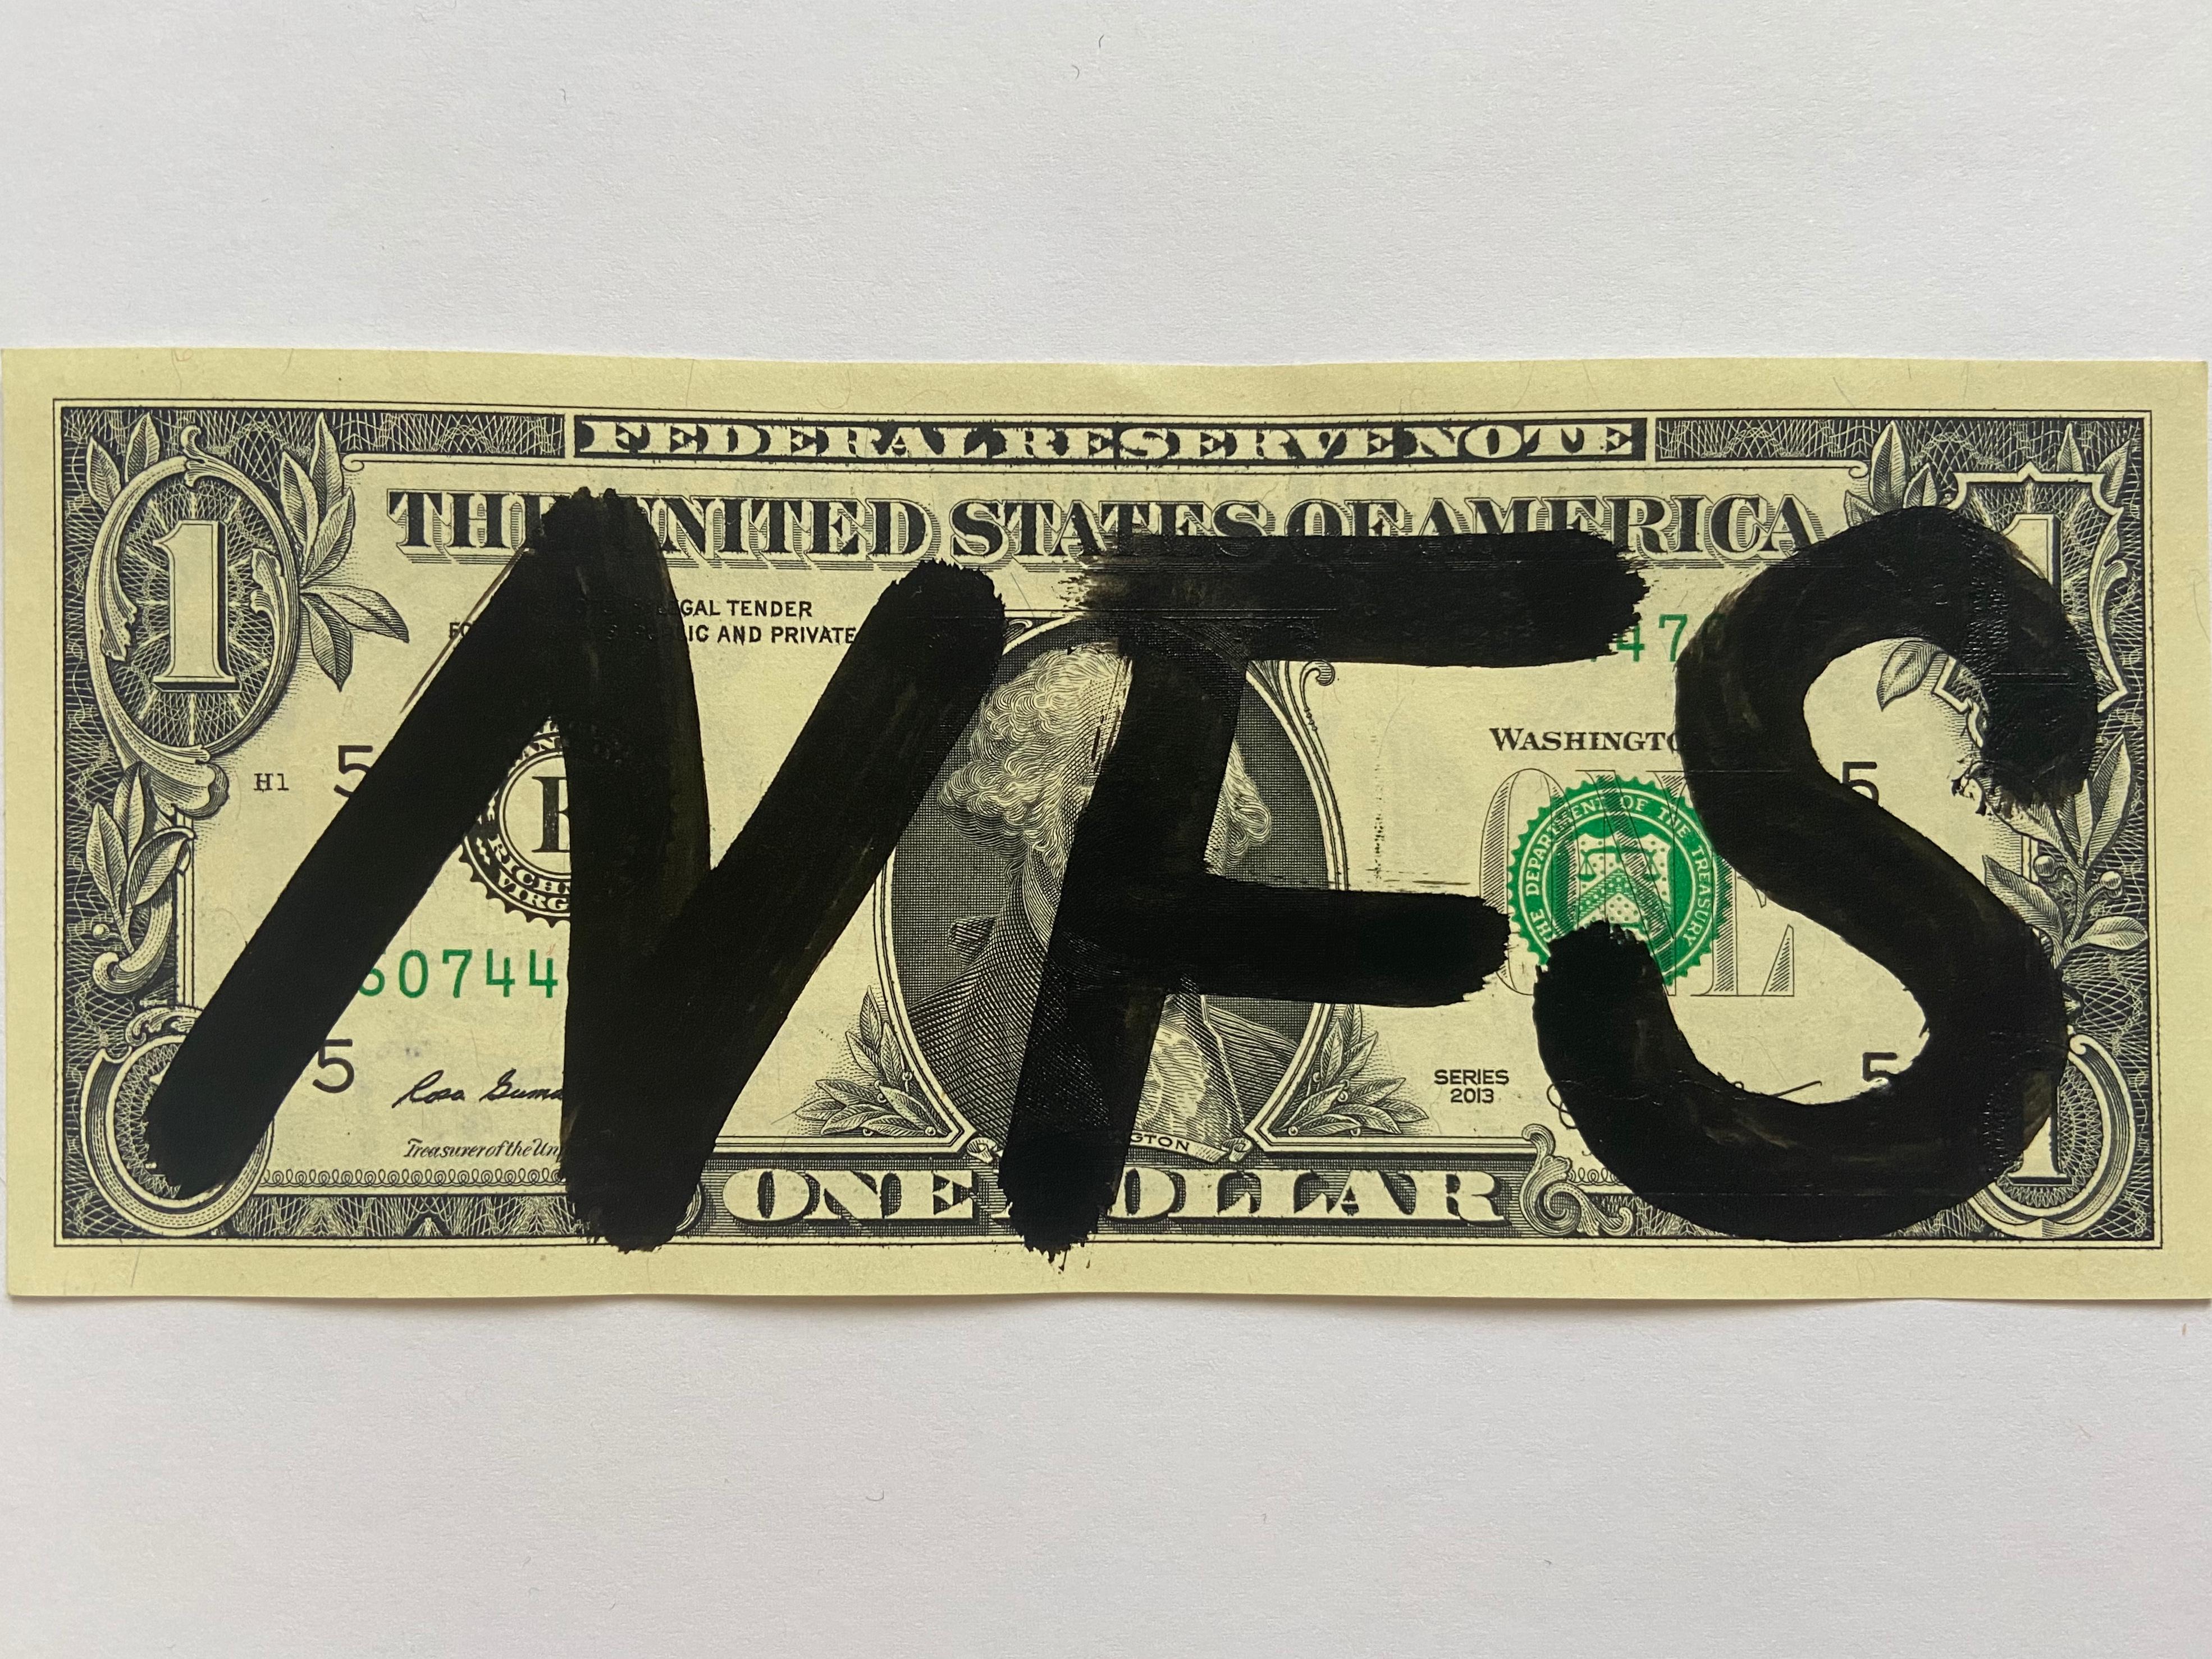 Death NYC
NFS
2017
Gluing on 1 dollar notes
Signed by the artist
Size: 7 x 15.5 cm
Original copy, delivered with certificate of authenticity and stamp of the artist
Perfect condition 
99 euros